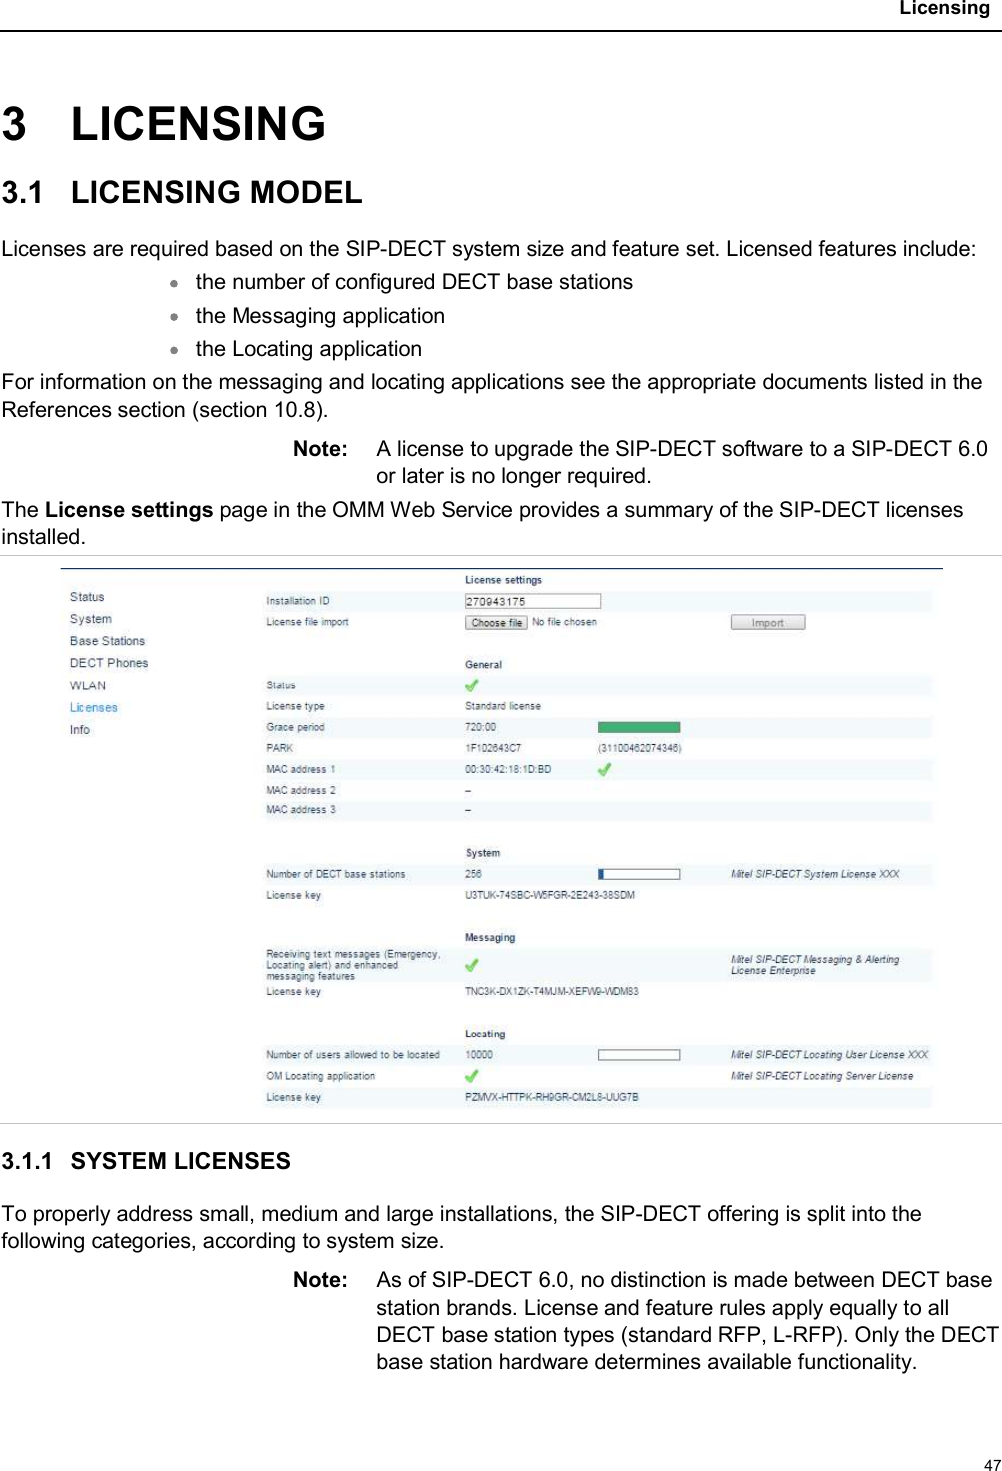 Licensing473 LICENSING3.1 LICENSING MODELLicenses are required based on the SIP-DECT system size and feature set. Licensed features include:the number of configured DECT base stationsthe Messaging application the Locating applicationFor information on the messaging and locating applications see the appropriate documents listed in the References section (section 10.8).Note: A license to upgrade the SIP-DECT software to a SIP-DECT 6.0 or later is no longer required. The License settings page in the OMM Web Service provides a summary of the SIP-DECT licenses installed.3.1.1 SYSTEM LICENSESTo properly address small, medium and large installations, the SIP-DECT offering is split into the following categories, according to system size. Note: As of SIP-DECT 6.0, no distinction is made between DECT base station brands. License and feature rules apply equally to all DECT base station types (standard RFP, L-RFP). Only the DECT base station hardware determines available functionality.